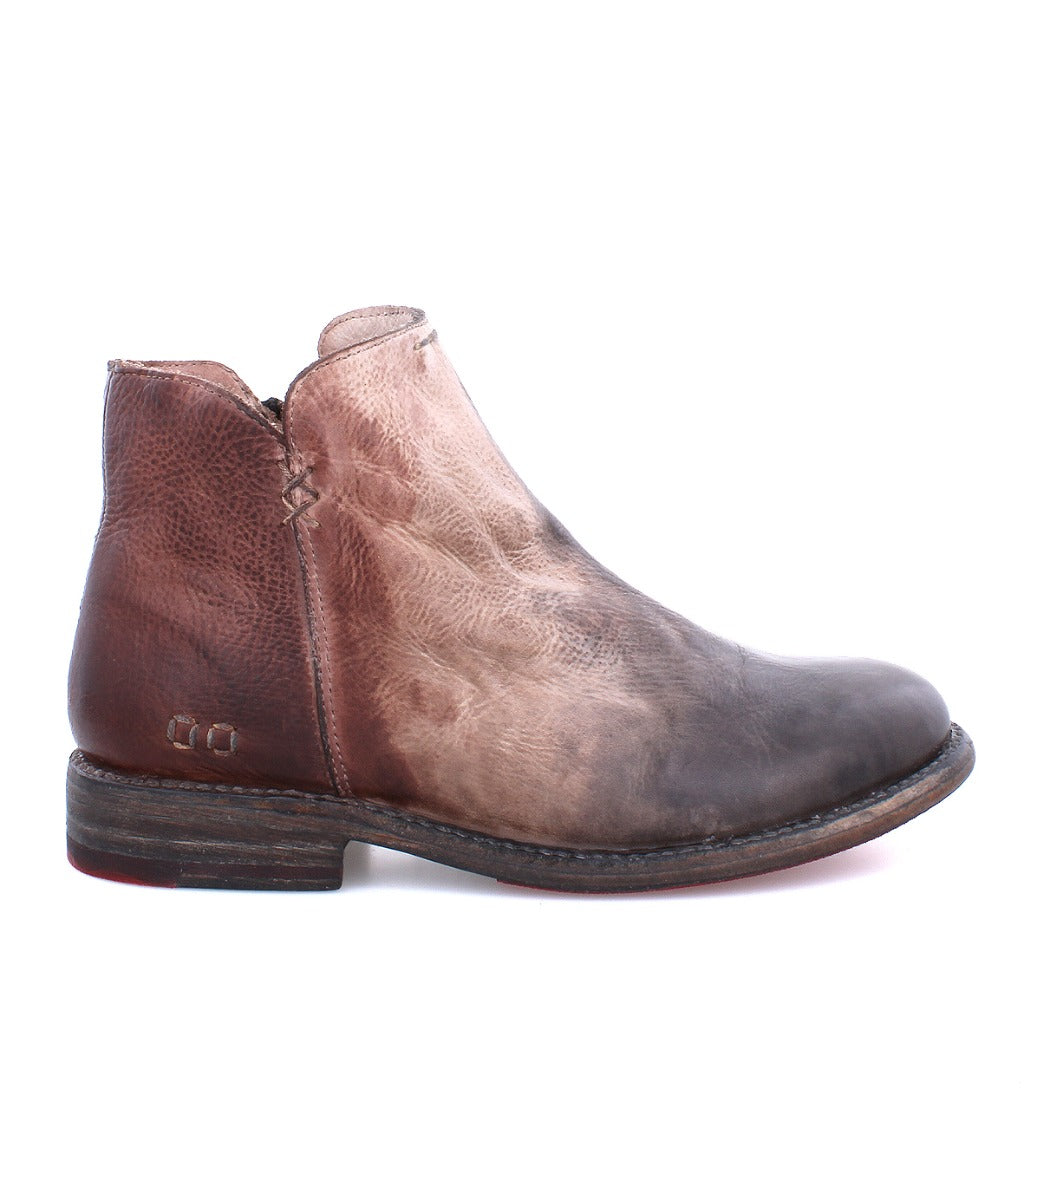 A women's Yurisa brown leather ankle boot by Bed Stu.